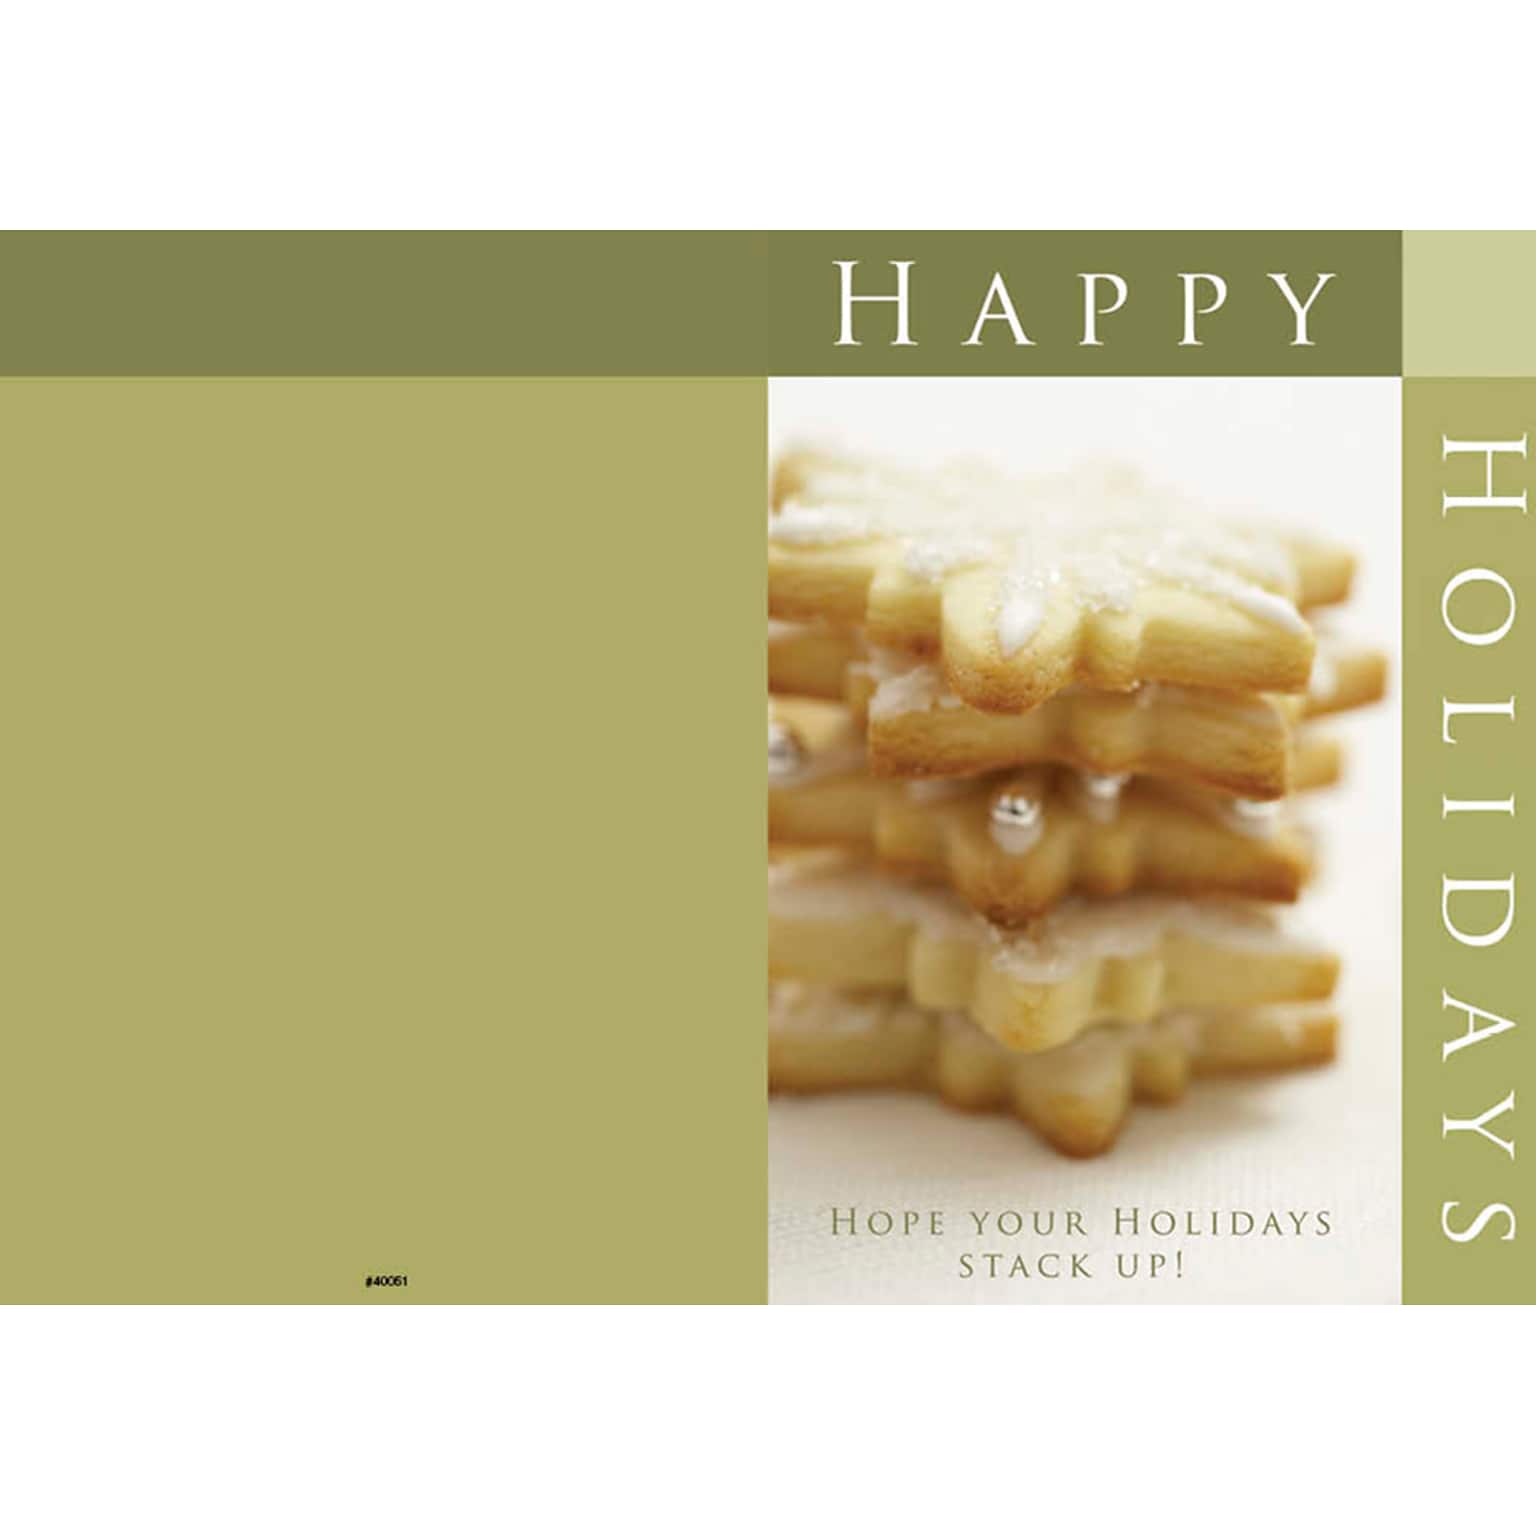 Happy Holidays - hope your holidays stack up - cookies - 7 x 10 scored for folding to 7 x 5, 25 cards w/A7 envelopes per set